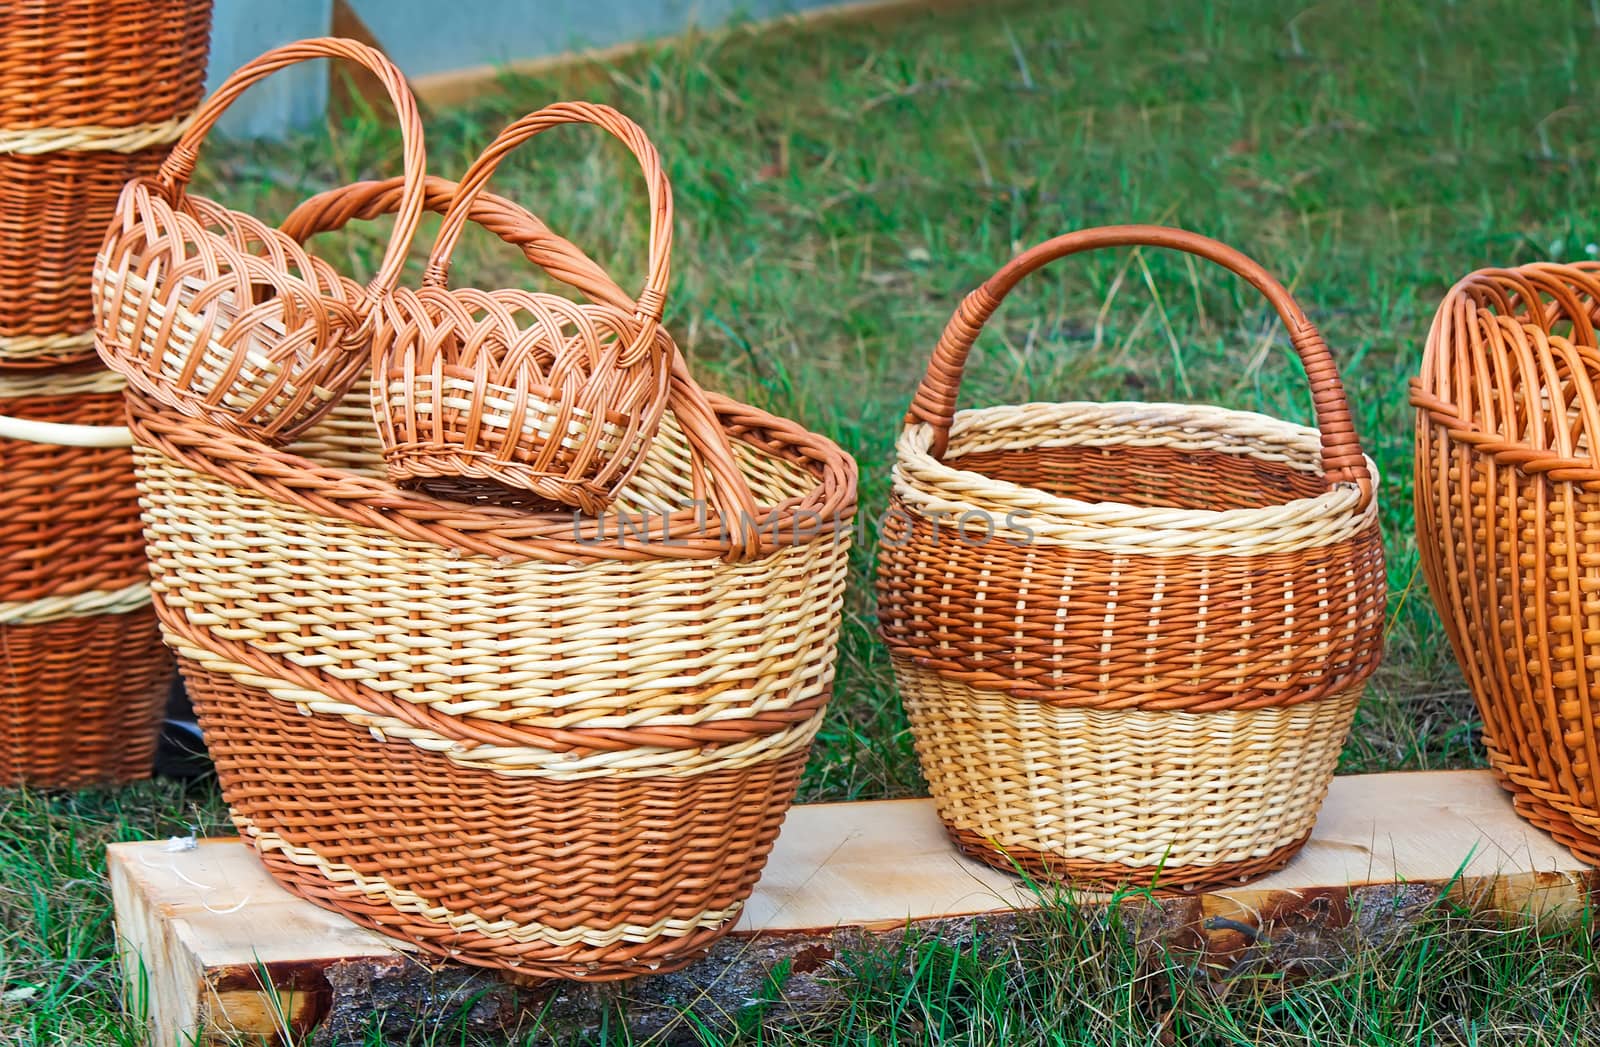 Beautiful and comfortable wicker baskets for fruits and vegetables sold at the fair.